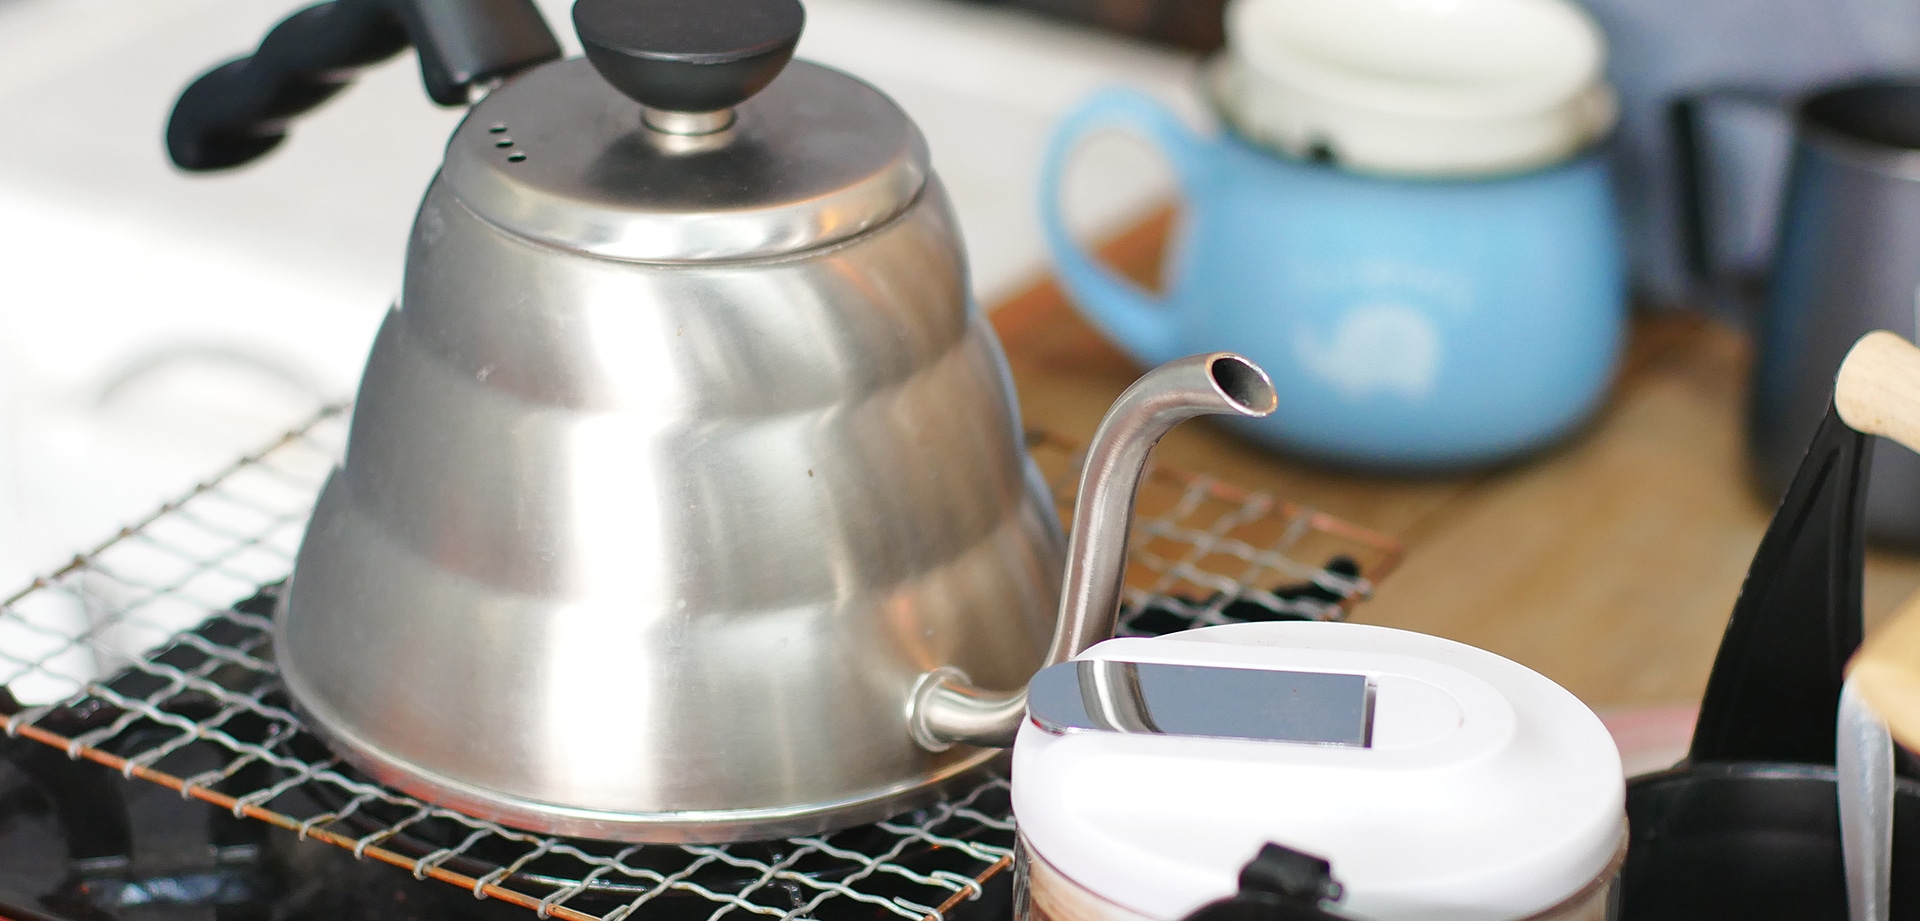 How To Clean My Stainless Steel Coffee Pot Pot Images